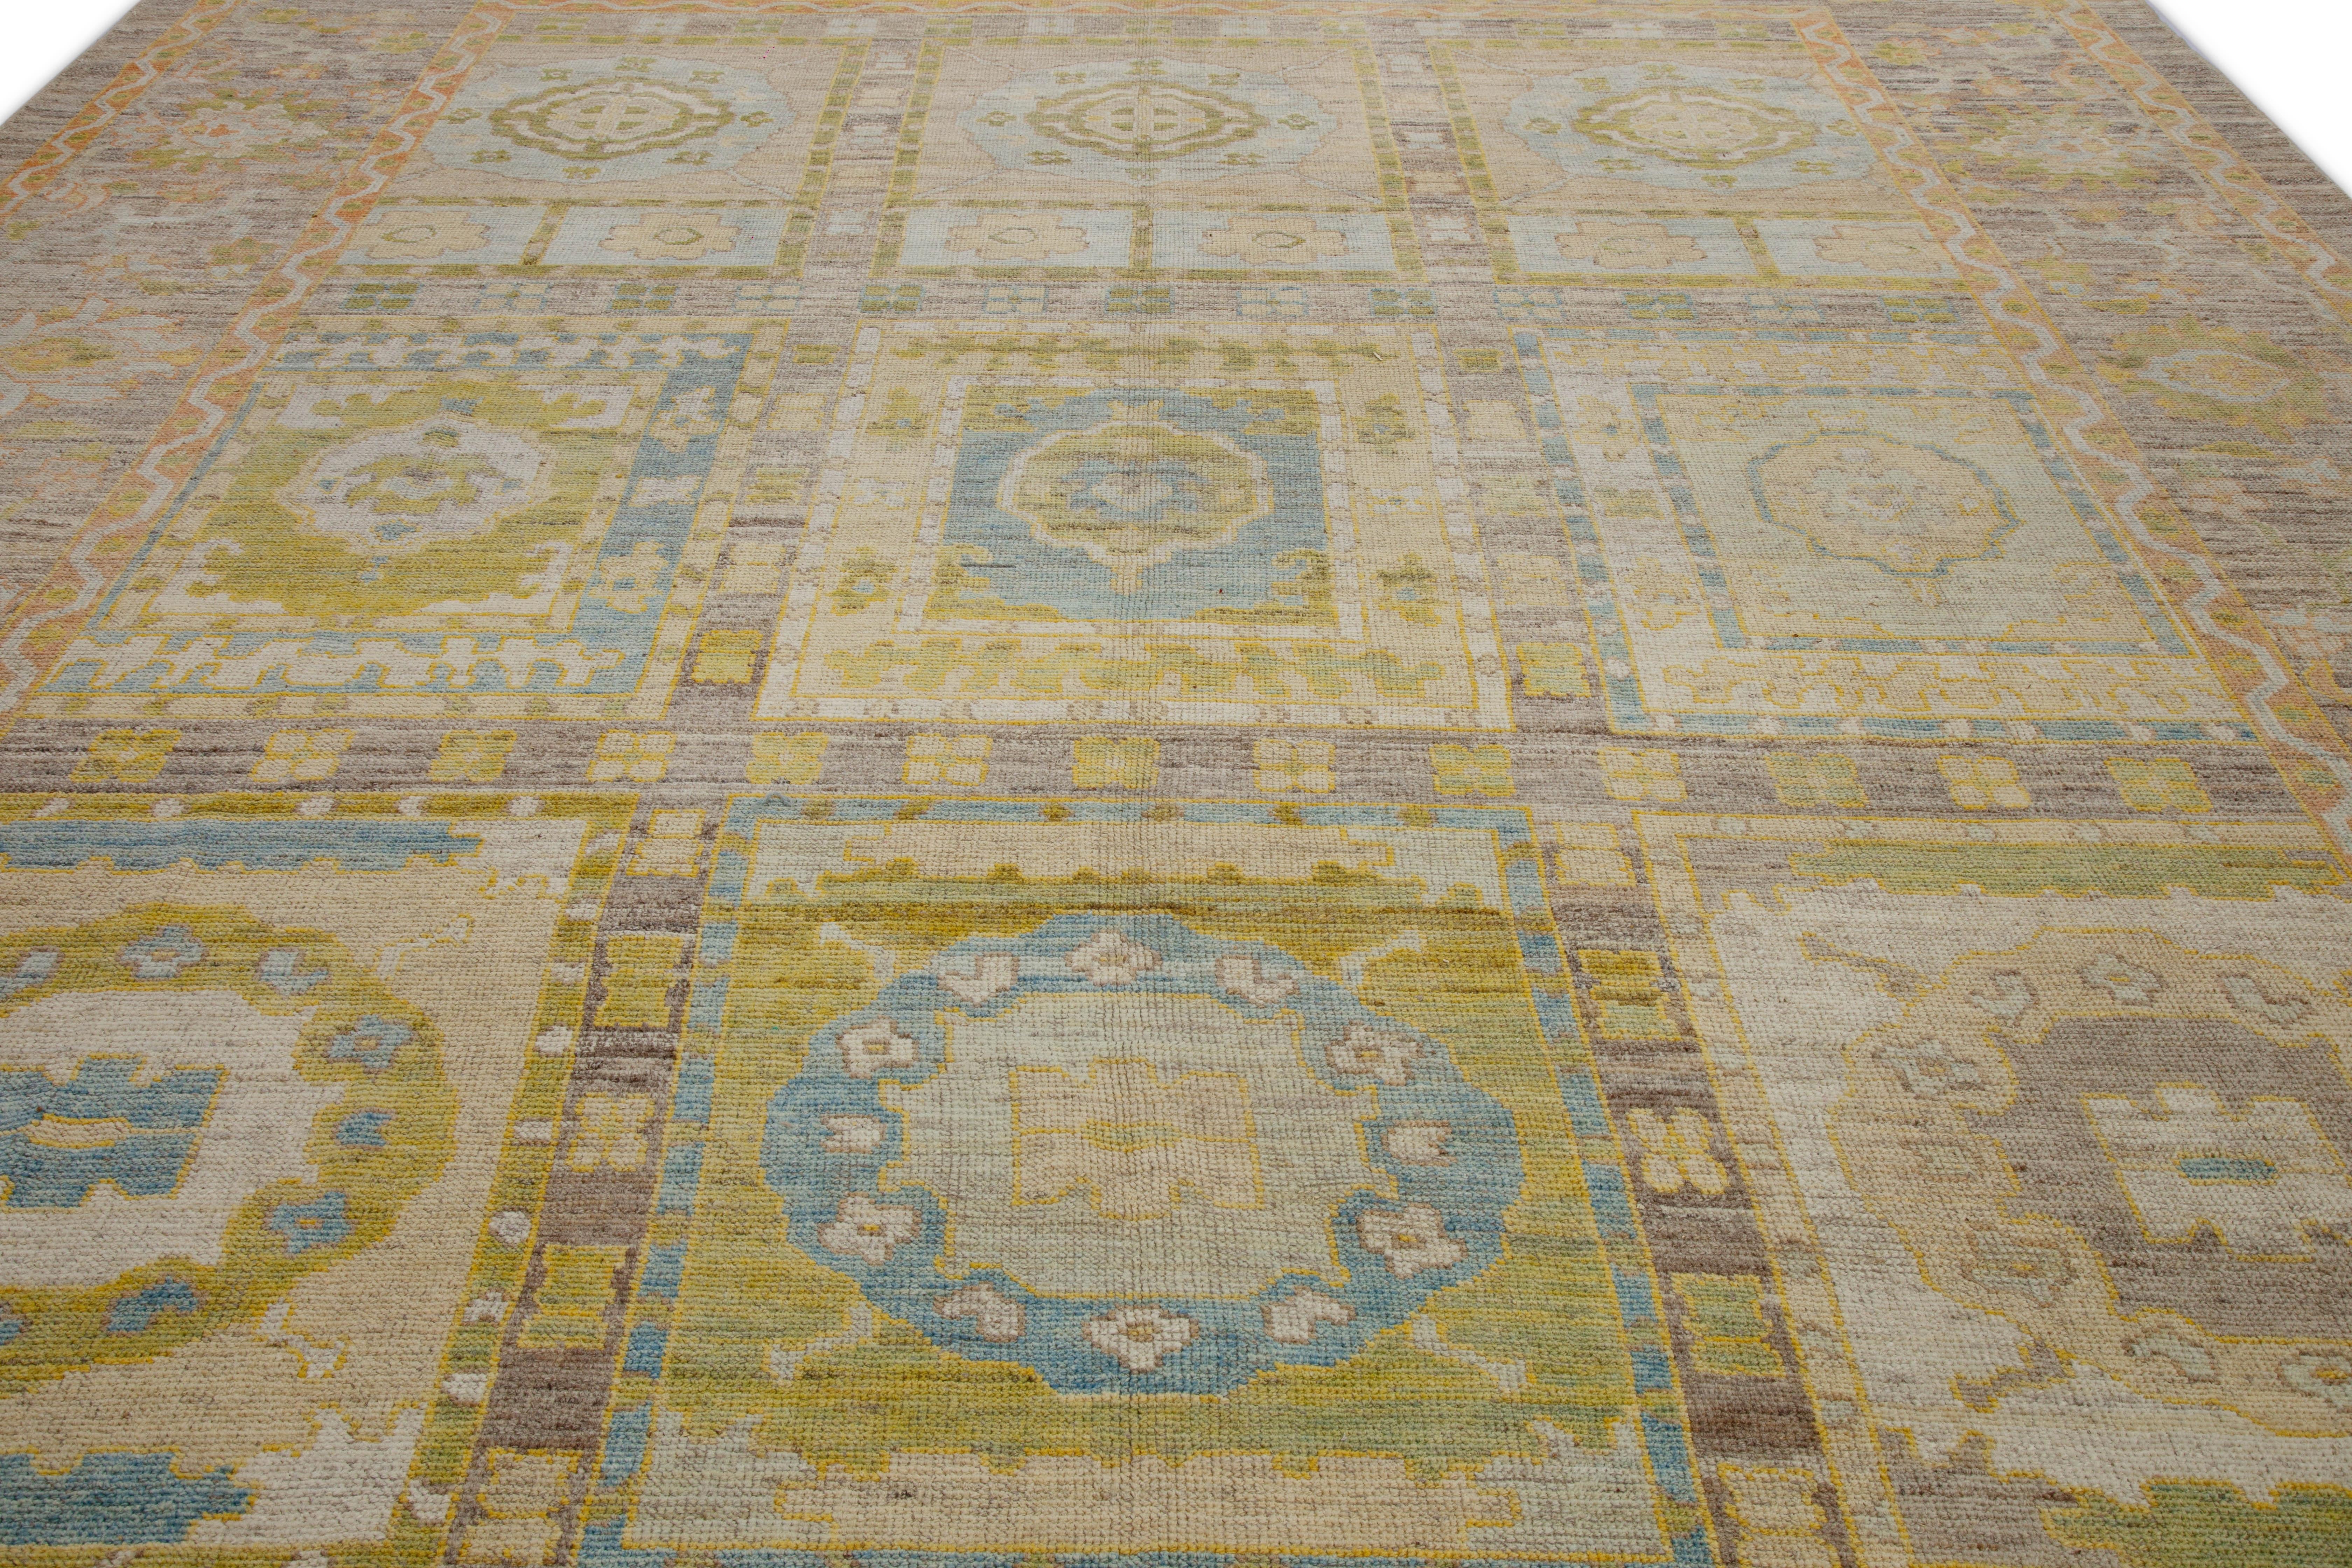 Islamic New Turkish Oushak Rug with Mixed Geometric and Floral Details For Sale